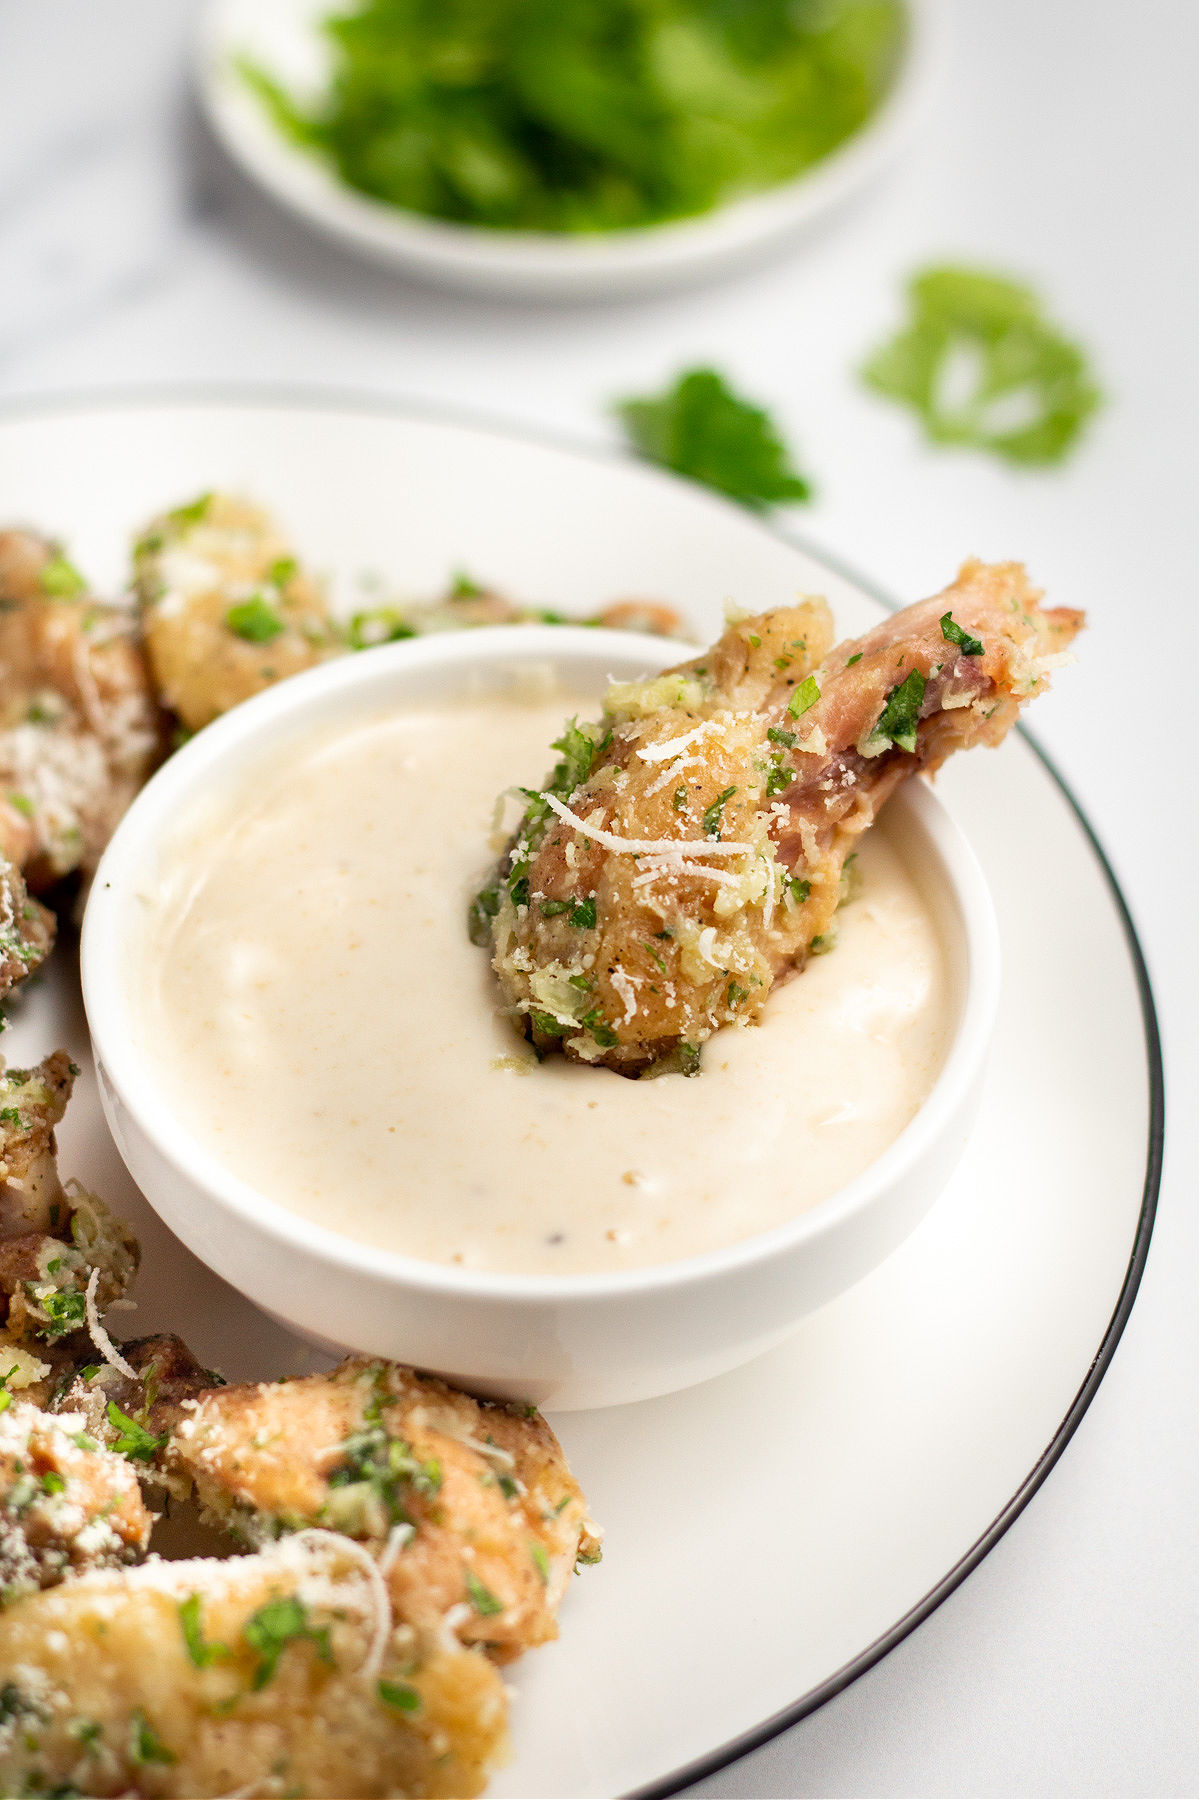 Chicken wing dipped in ranch dressing.